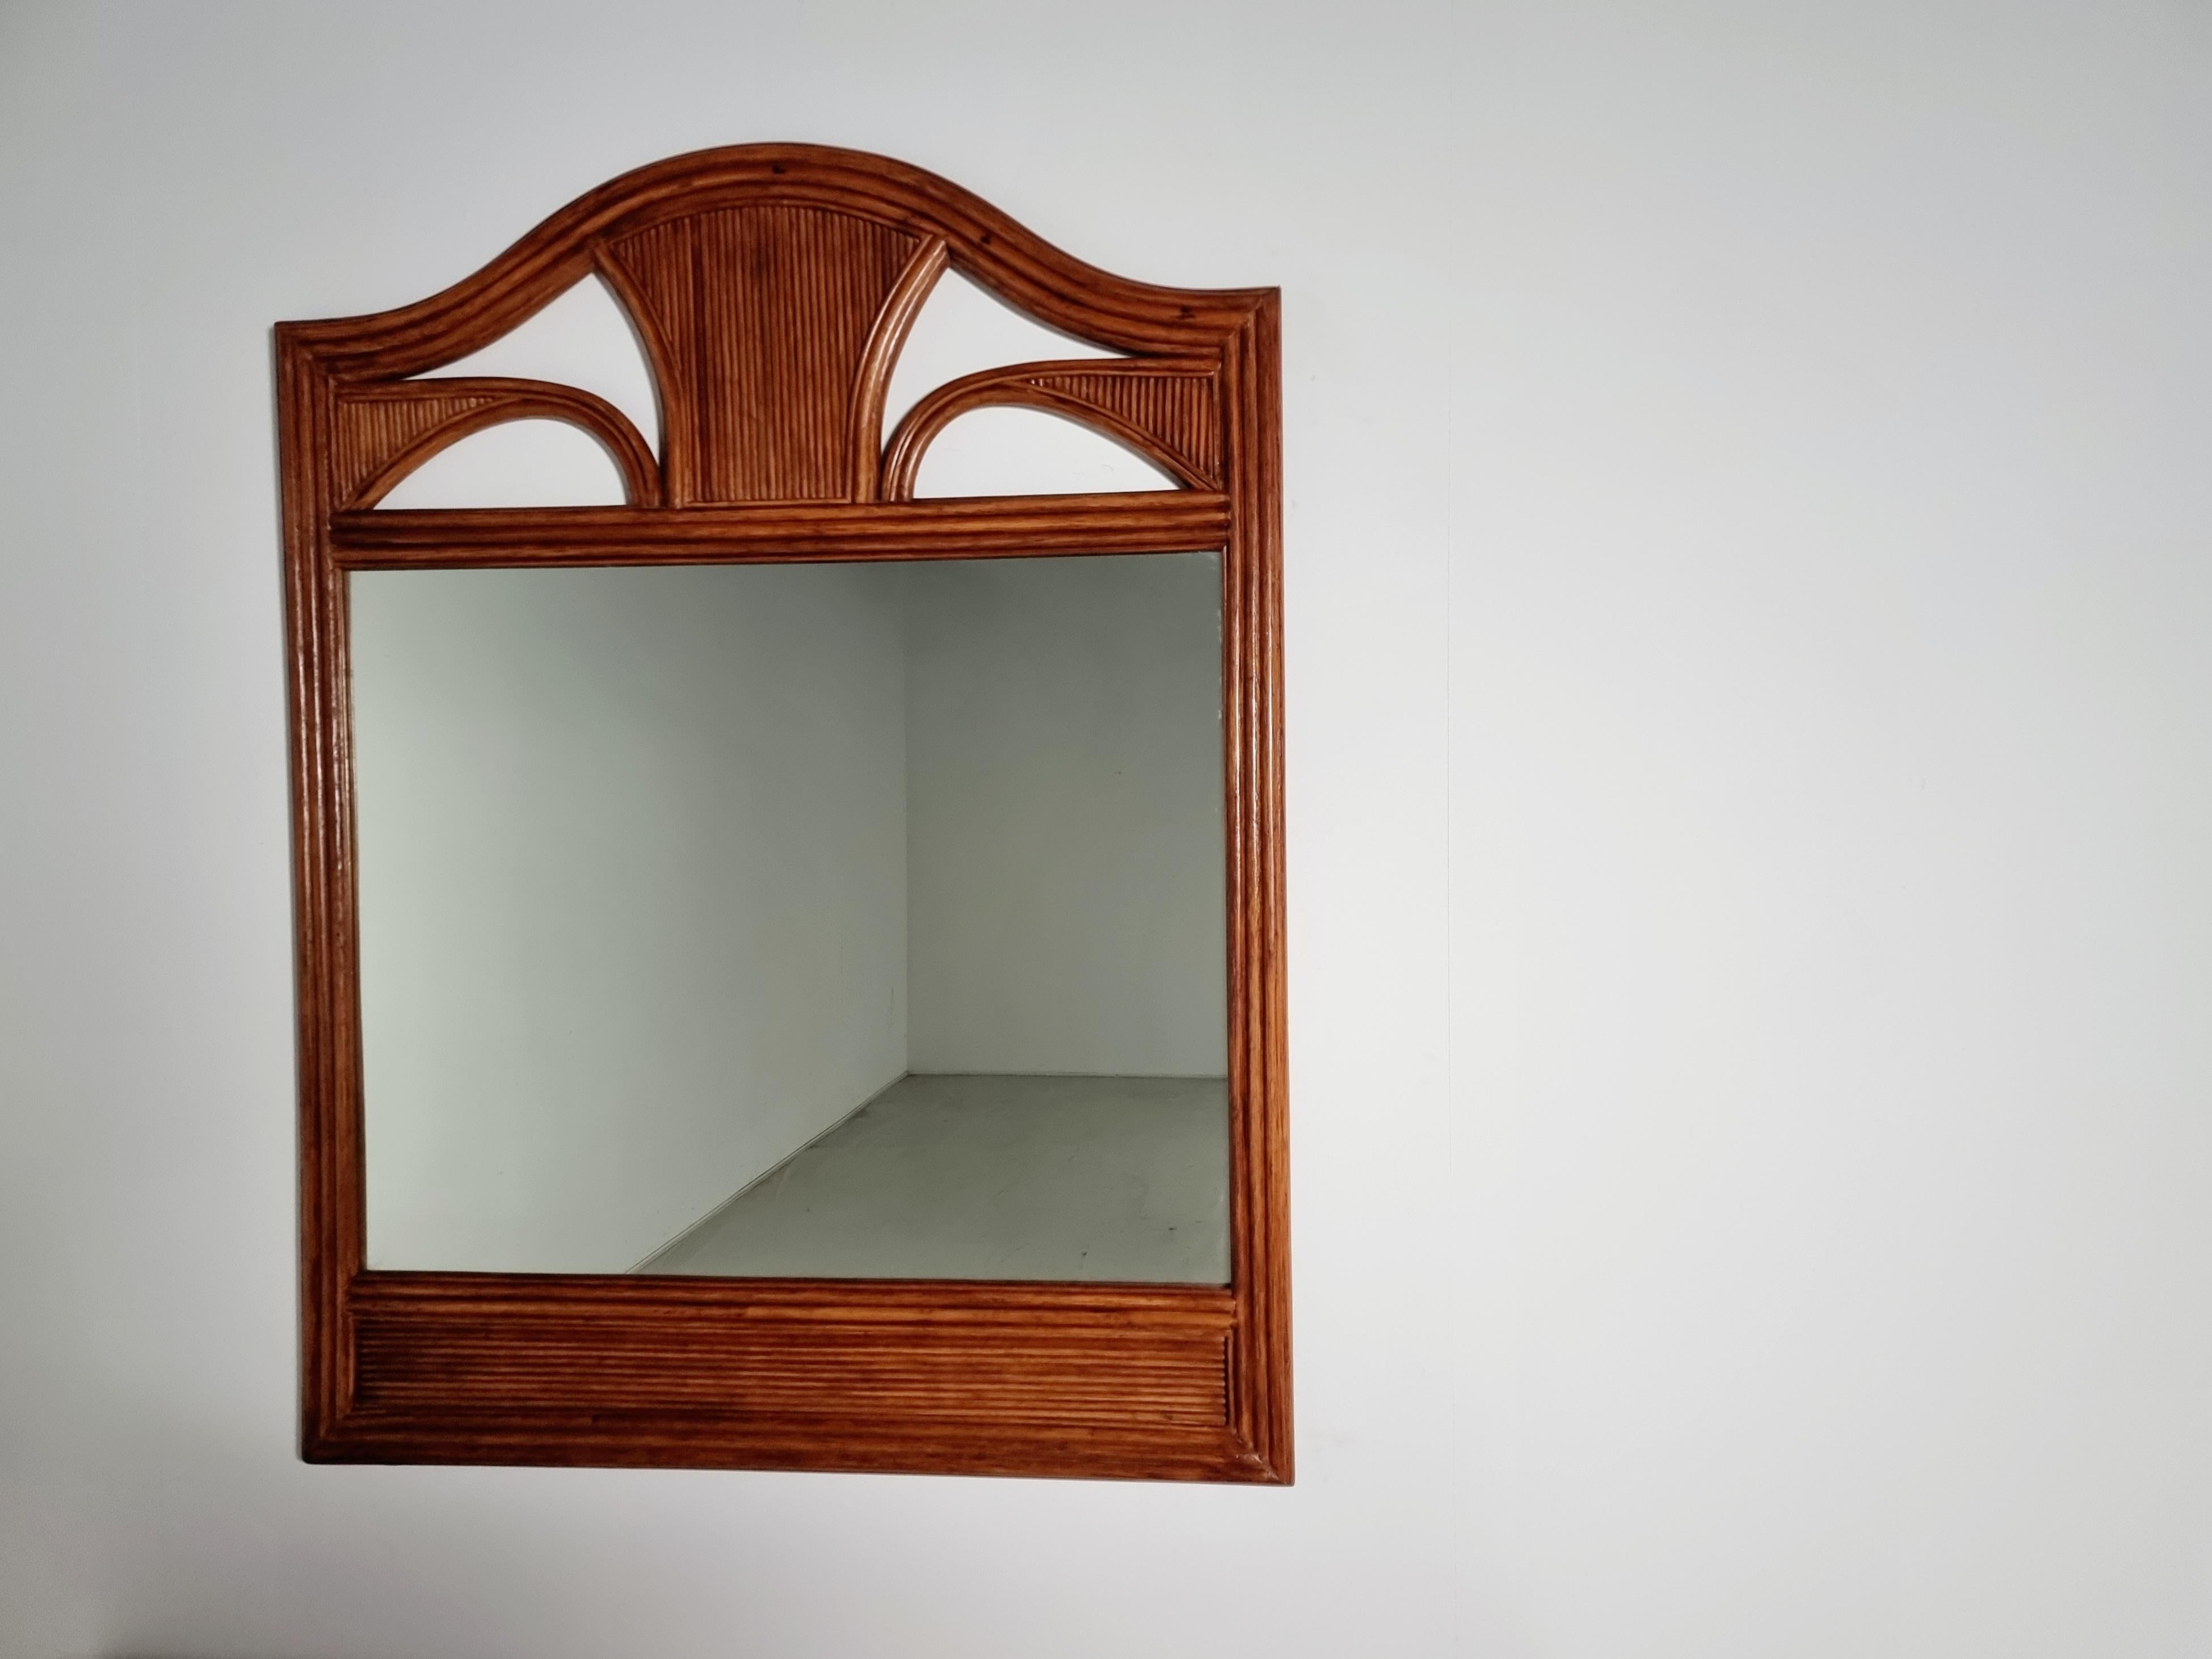 Walnut veneer Dresser with Matching Mirror from Italy, 1970s For Sale 4